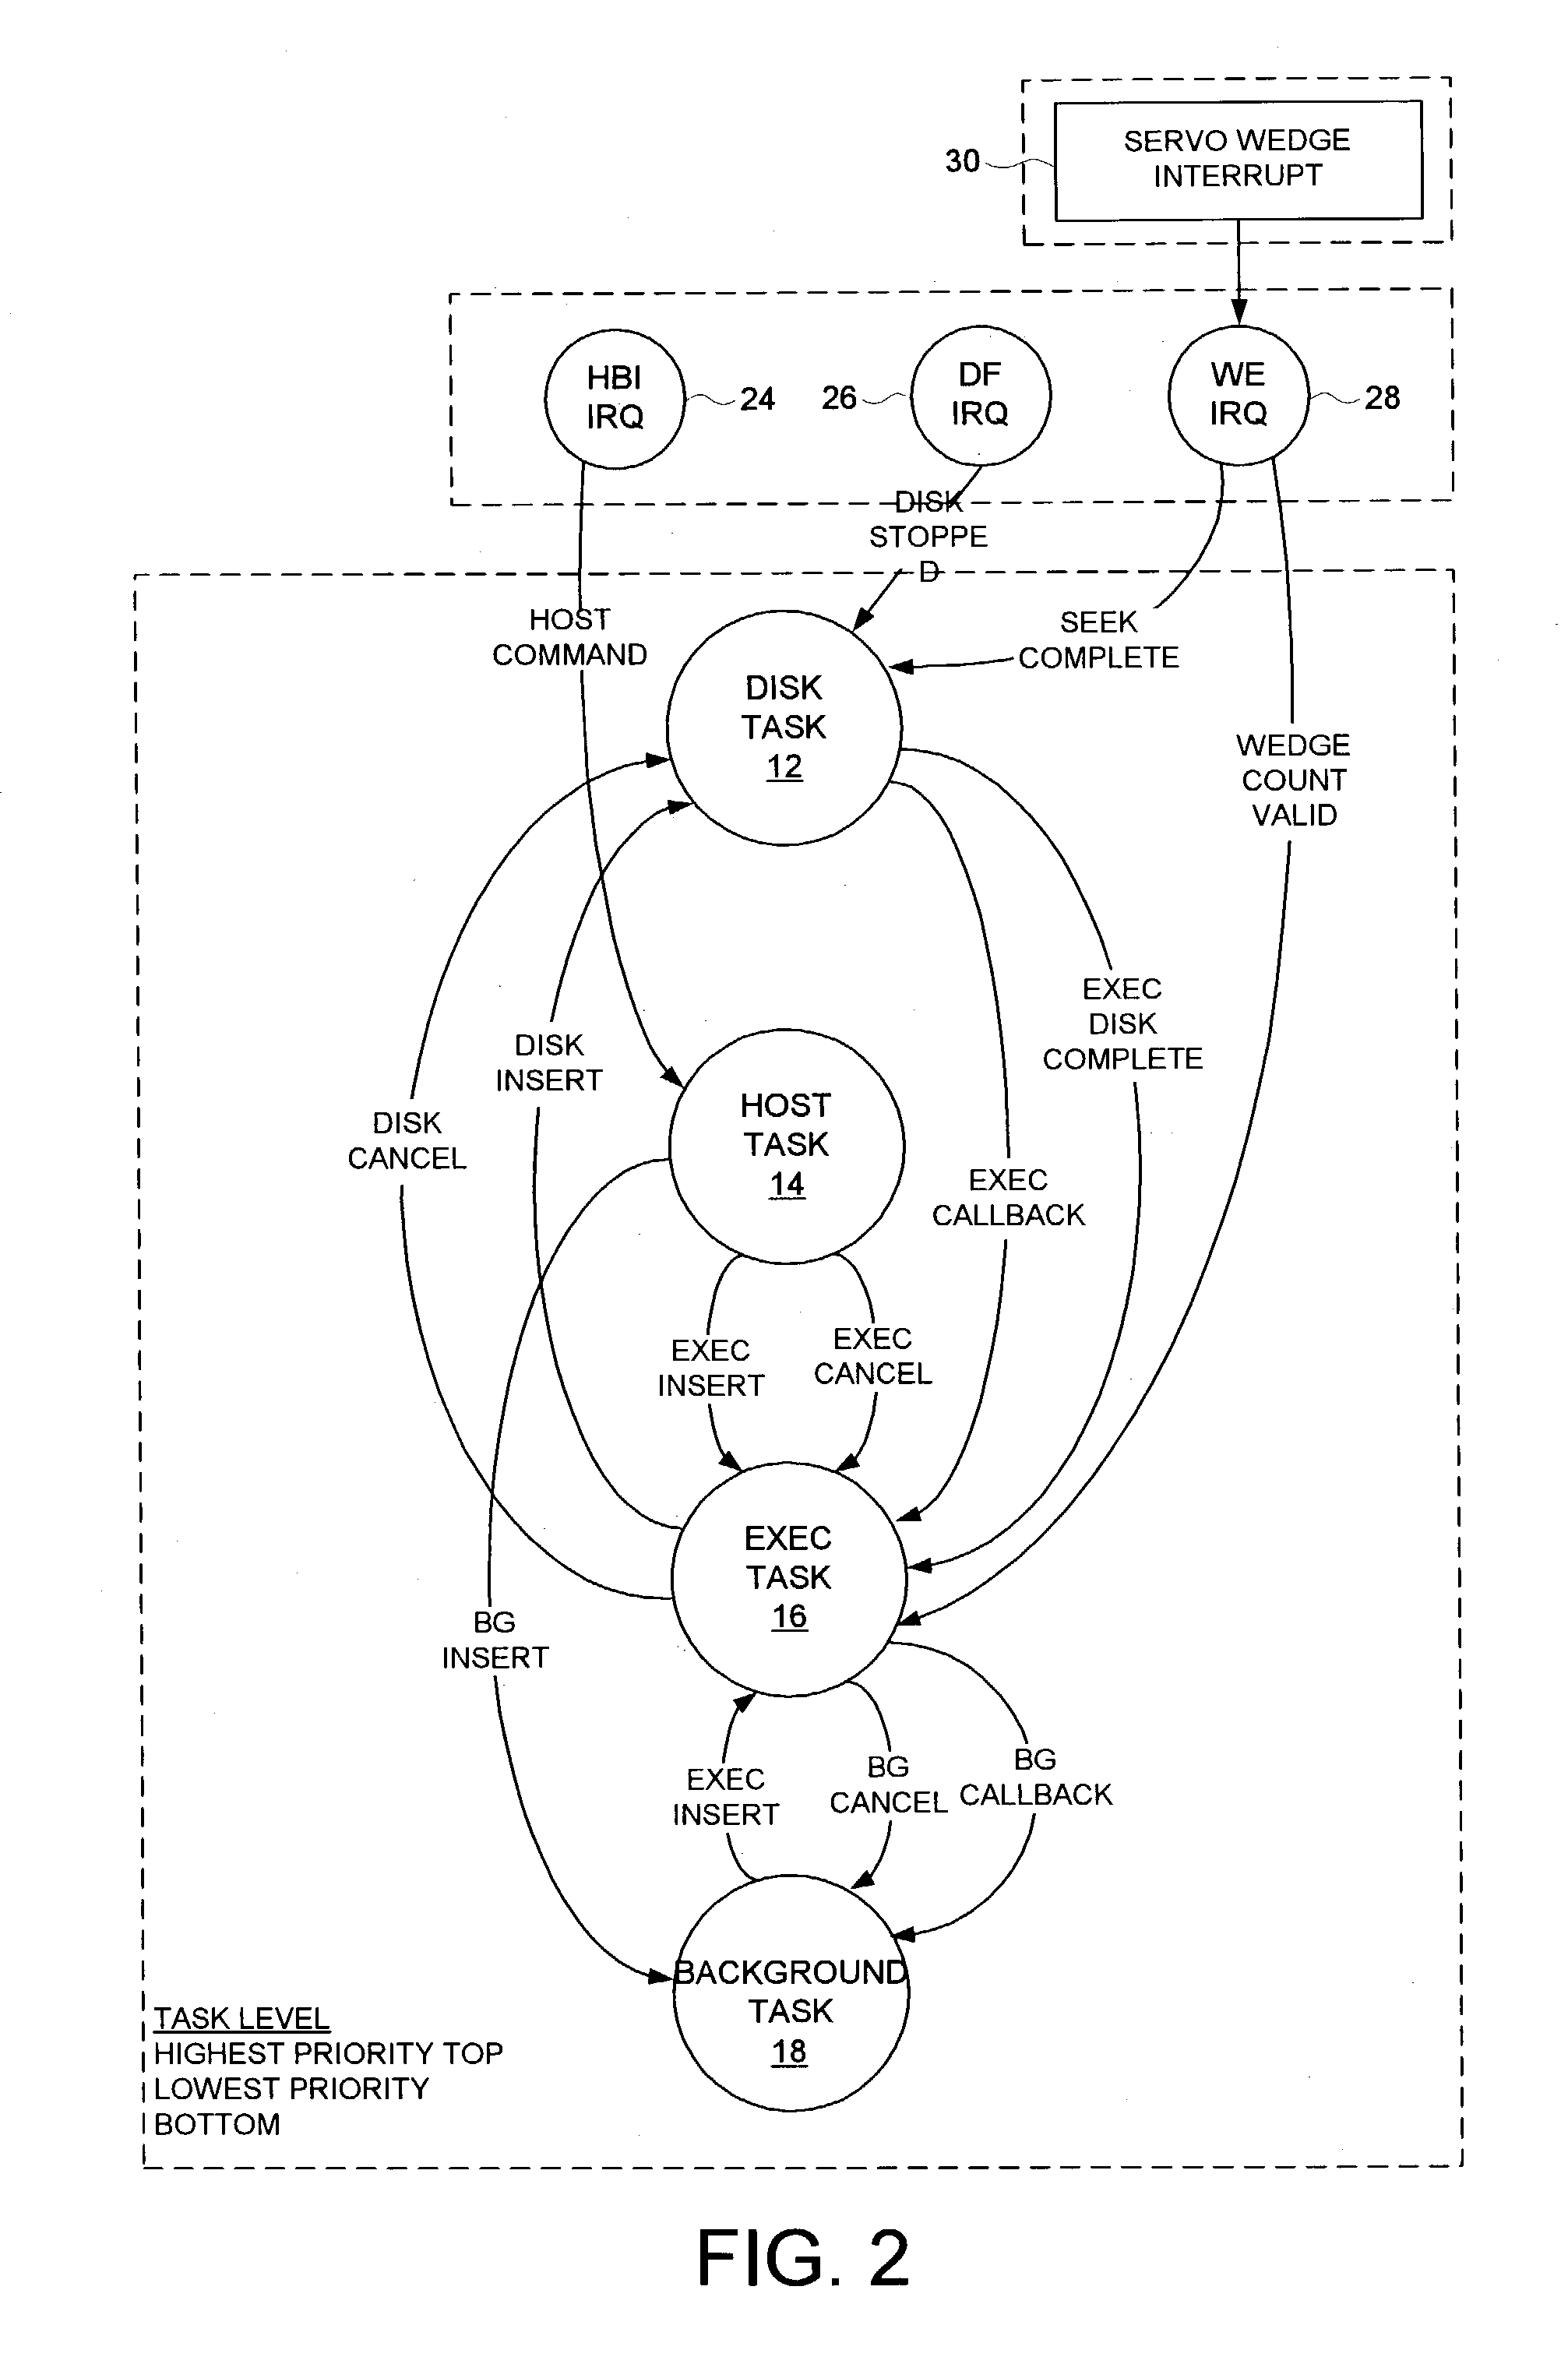 Disk drive executing a preemptive multitasking operating system comprising tasks of varying priority